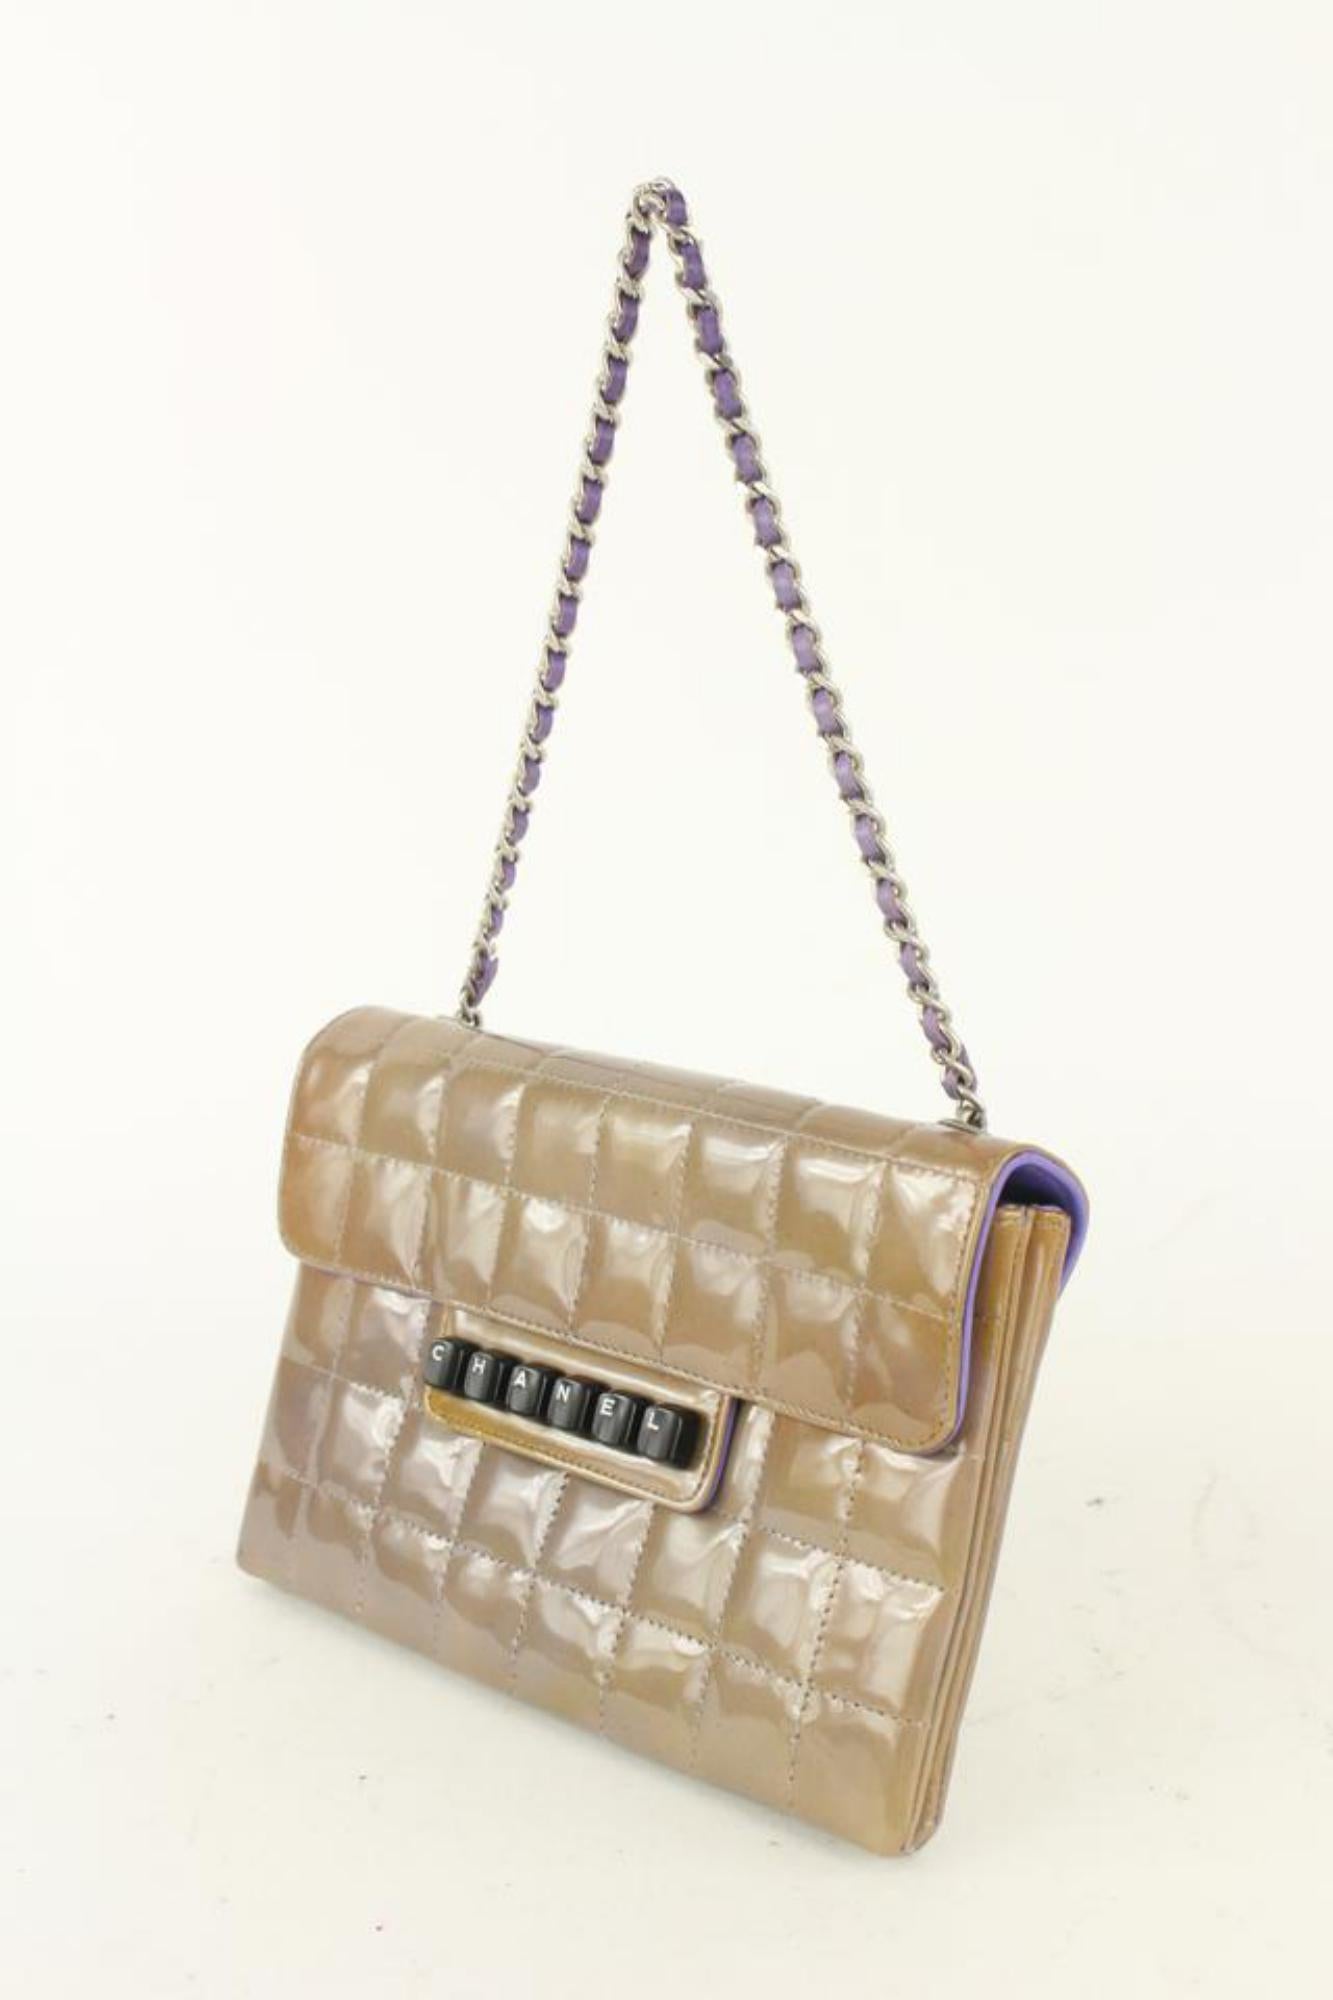 Chanel Purple-Taupe Chocolate Bar Quilted Keyboard Chain Flap 27C1S
Date Code/Serial Number: 6076052
Made In: France
Measurements: Length:  8